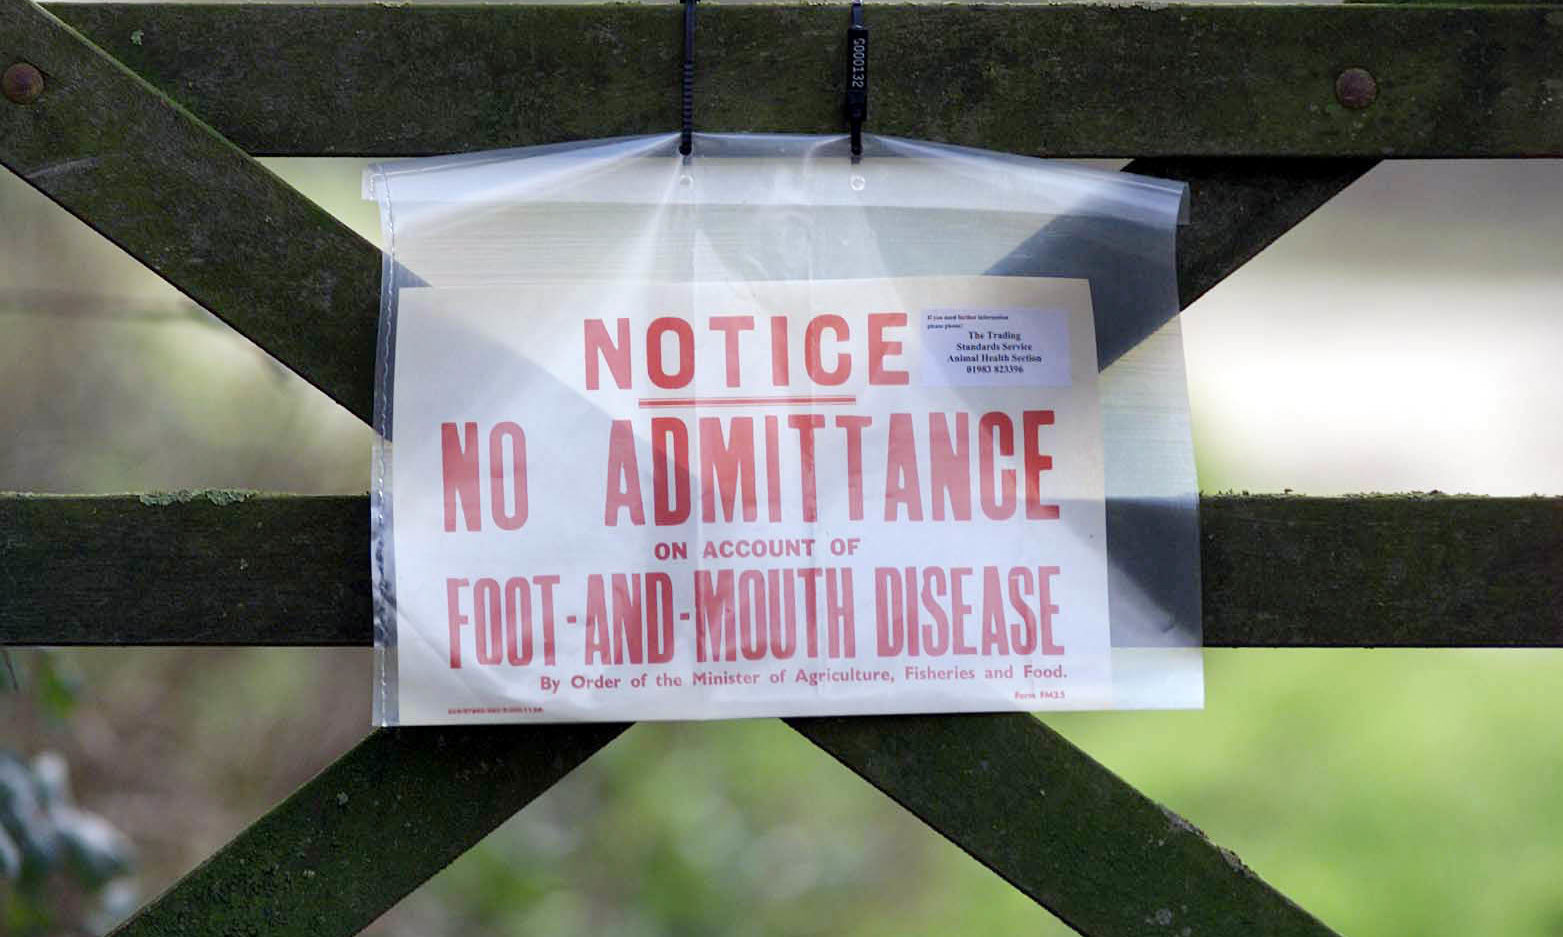 Wednesday, February 21 2001, where Ministry of Agriculture officials were investigating the possibility of an outbreak of foot-and-mouth disease.